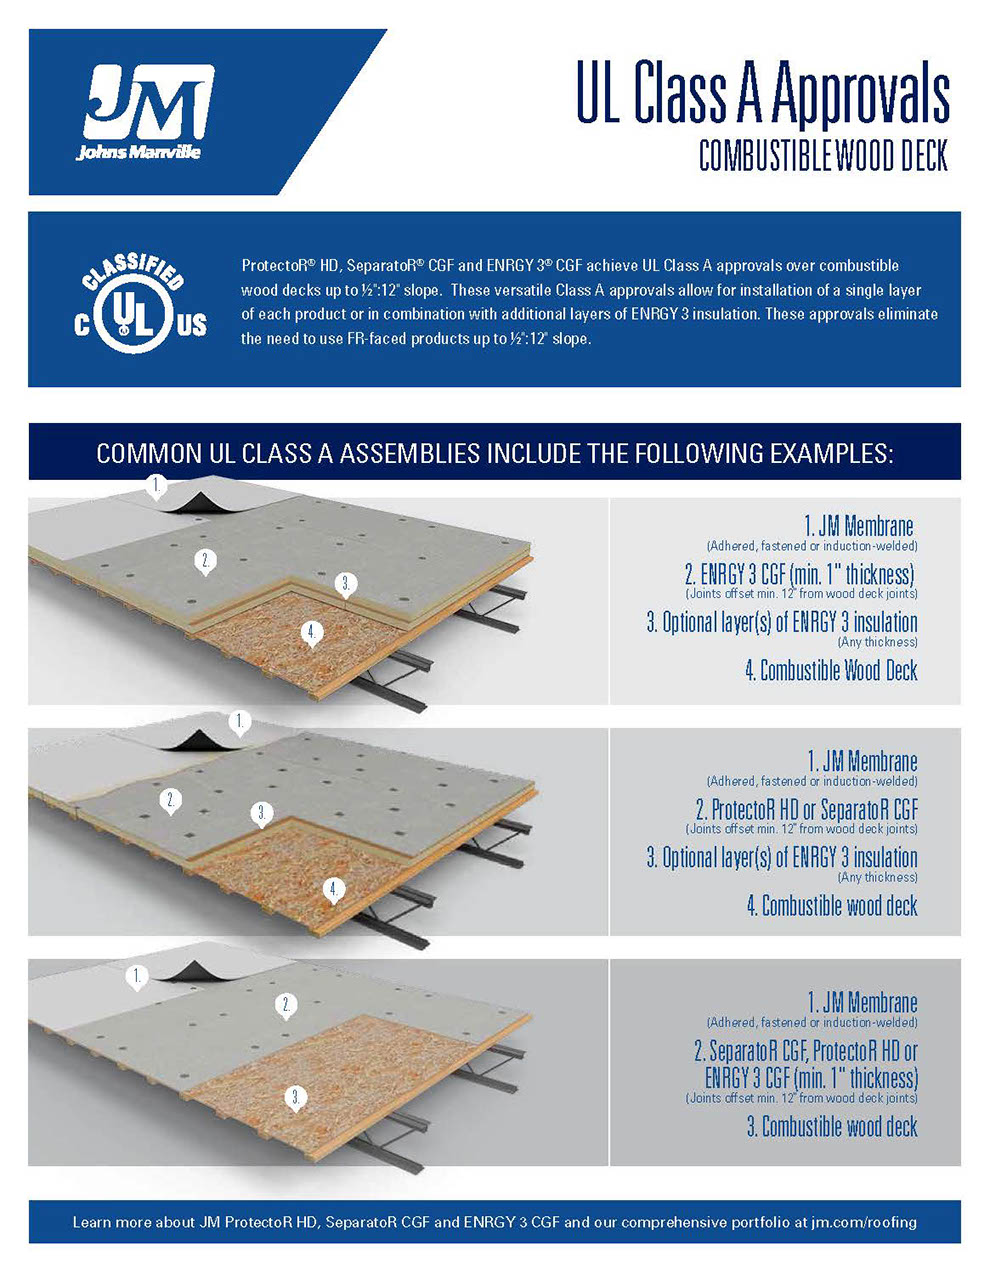 UL Class A Combustible Wood Deck Approvals